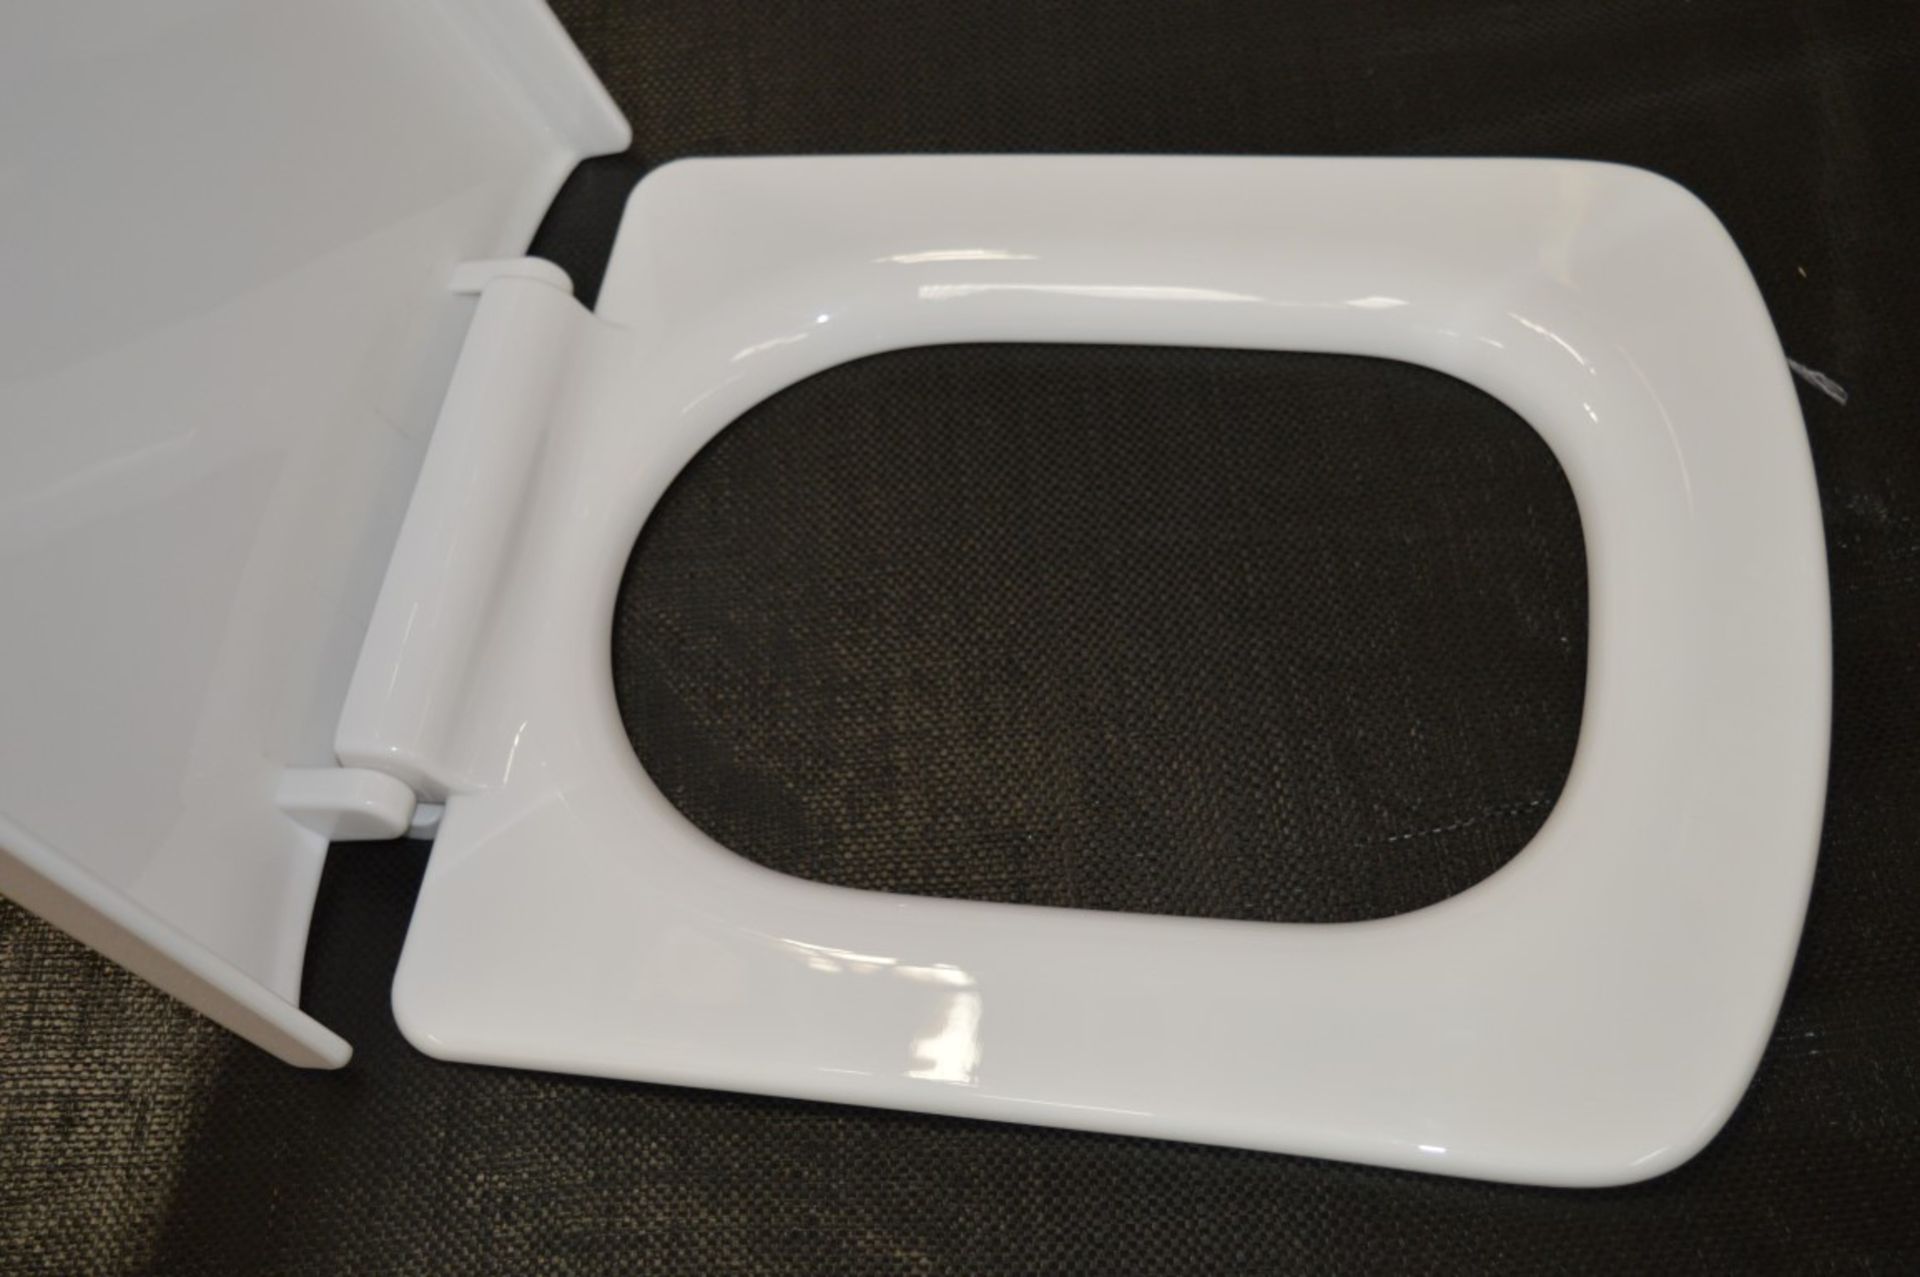 10 x Vogue Chevron Modern Square White Soft Close Toilet Seats and Cover Top Fixing - Brand New - Image 3 of 5